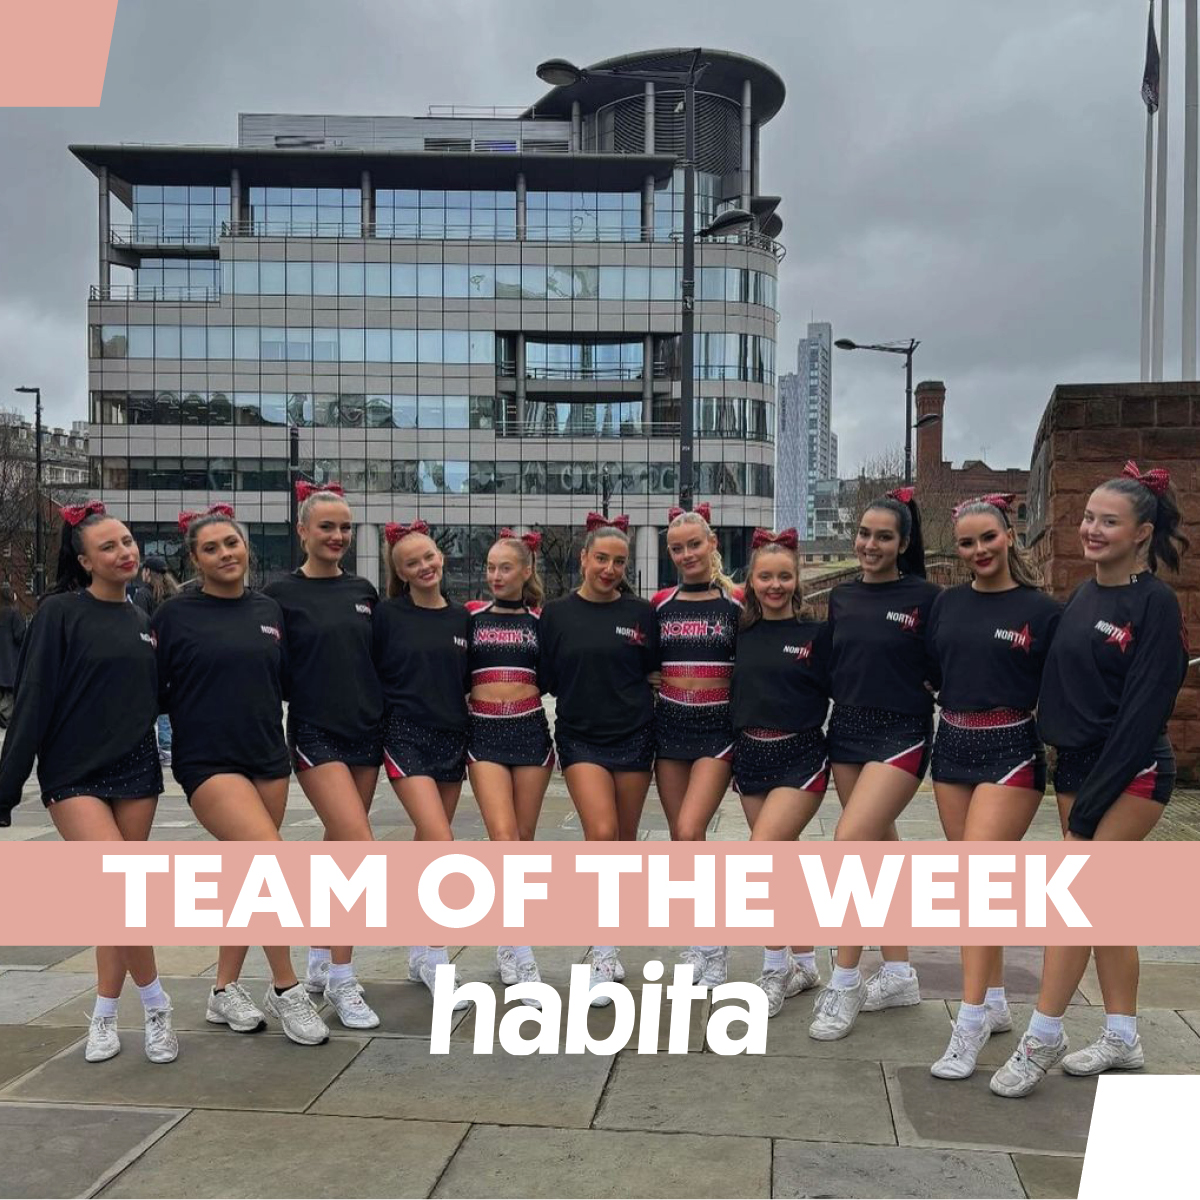 TEAM OF THE WEEK Sponsored by @habitanewcastle This weeks winners as selected by VP SPORT Harvey Burn are… 👯 NORTHUMBRIA NORTHSTARS 👯 The Northstars rocked their first comp of the year! Level 1 & 3 were National Champions, with a close 2nd place for Level 2 and Dance! 👯